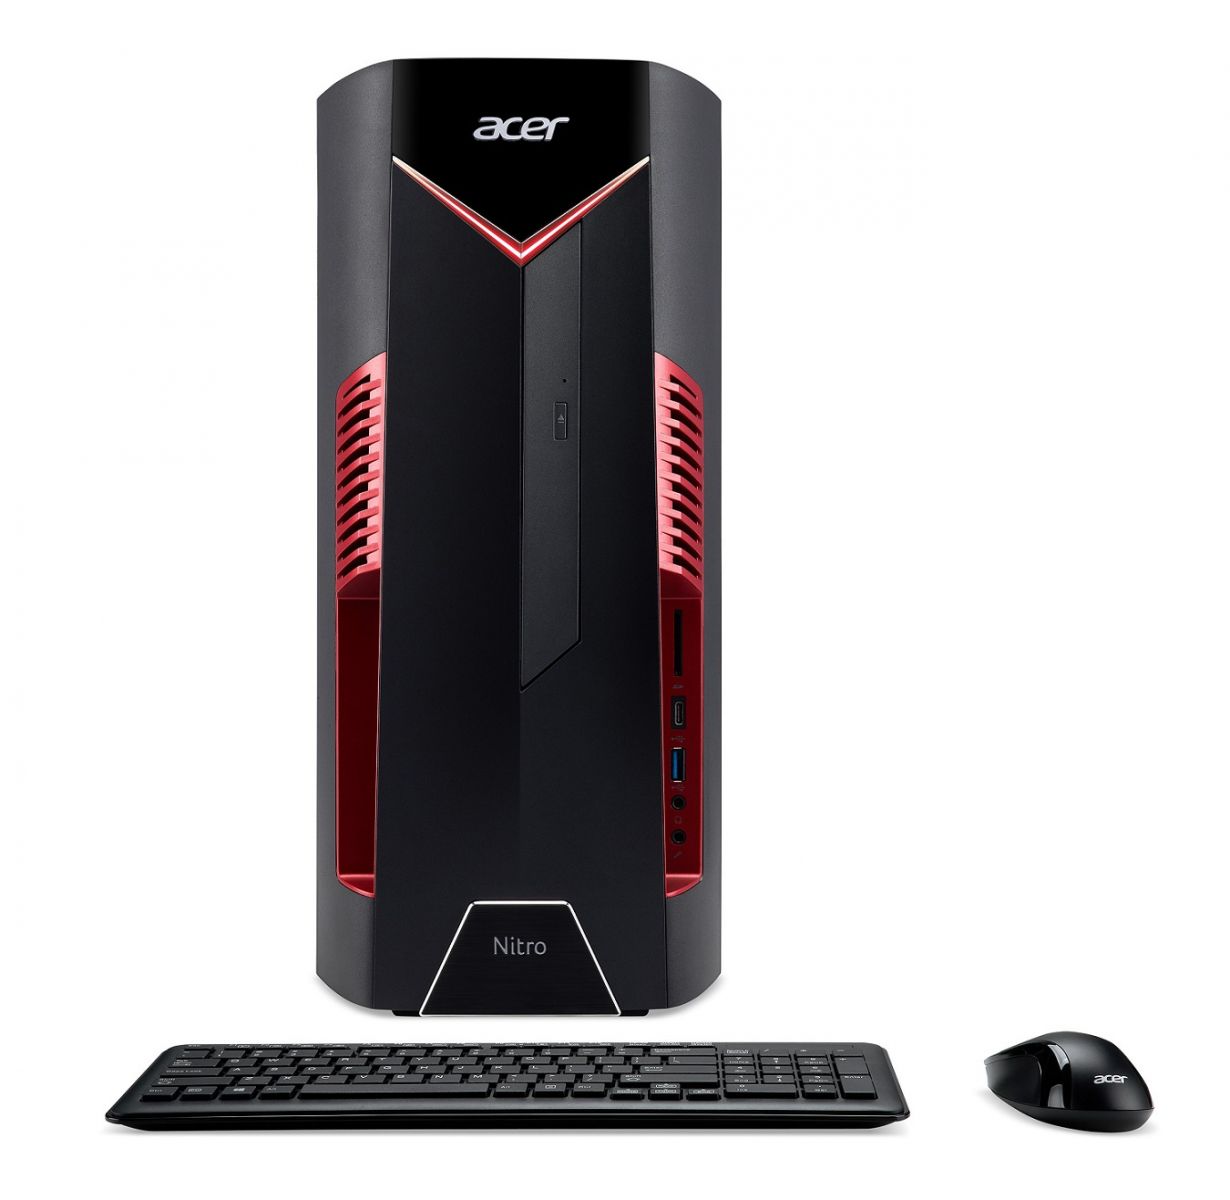 Acer’s next lineup of hardware focuses on productivity and gaming